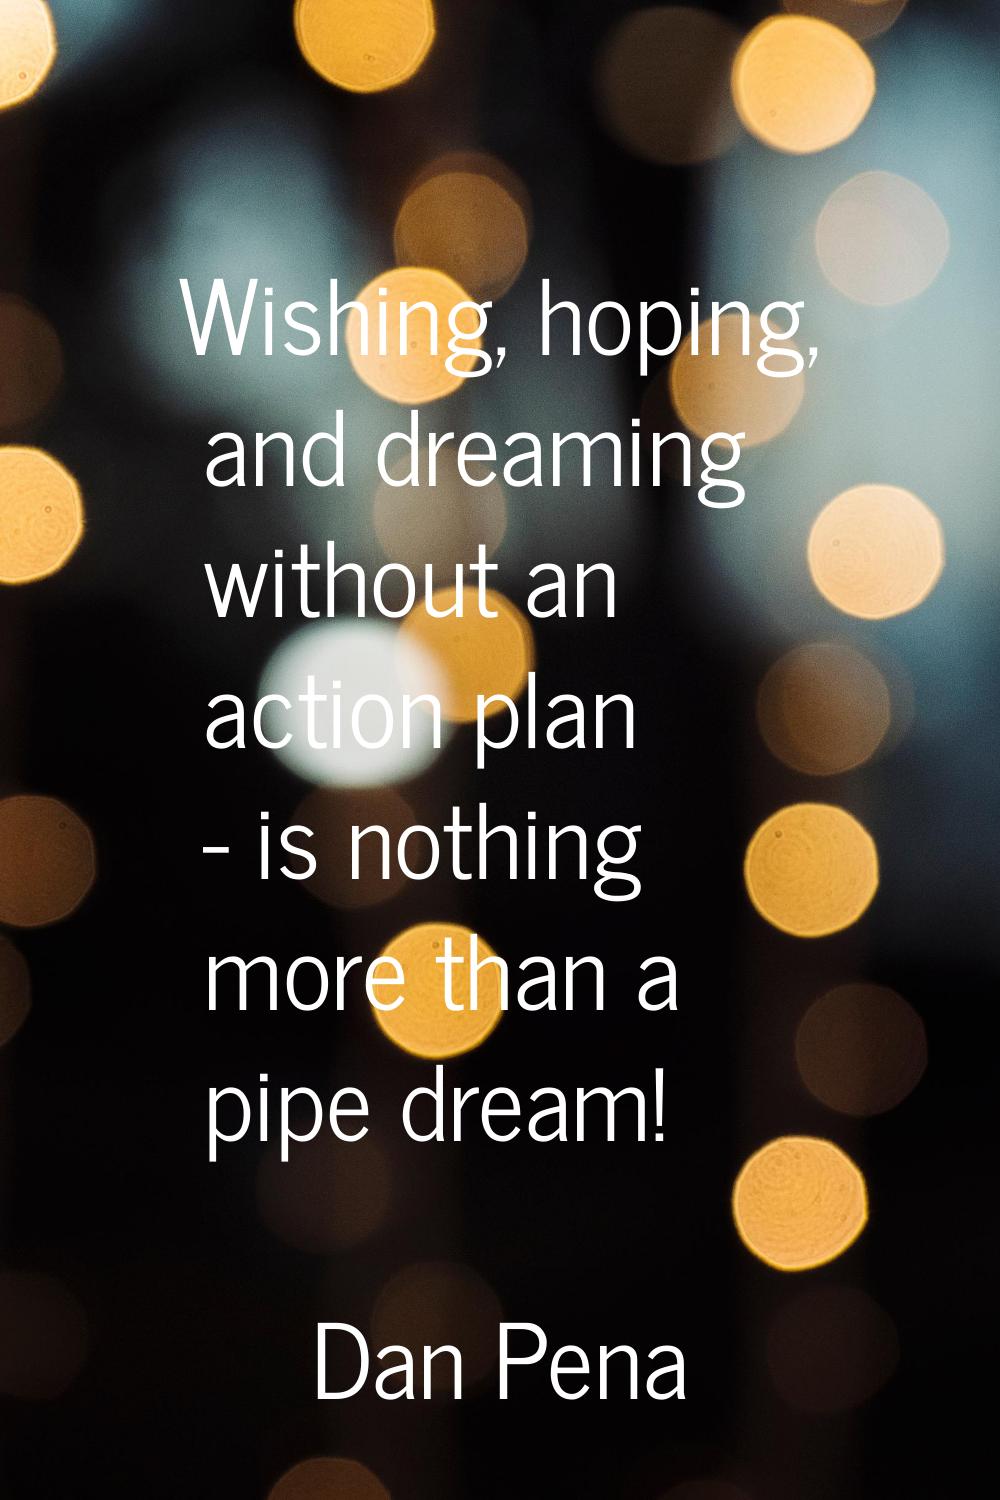 Wishing, hoping, and dreaming without an action plan - is nothing more than a pipe dream!